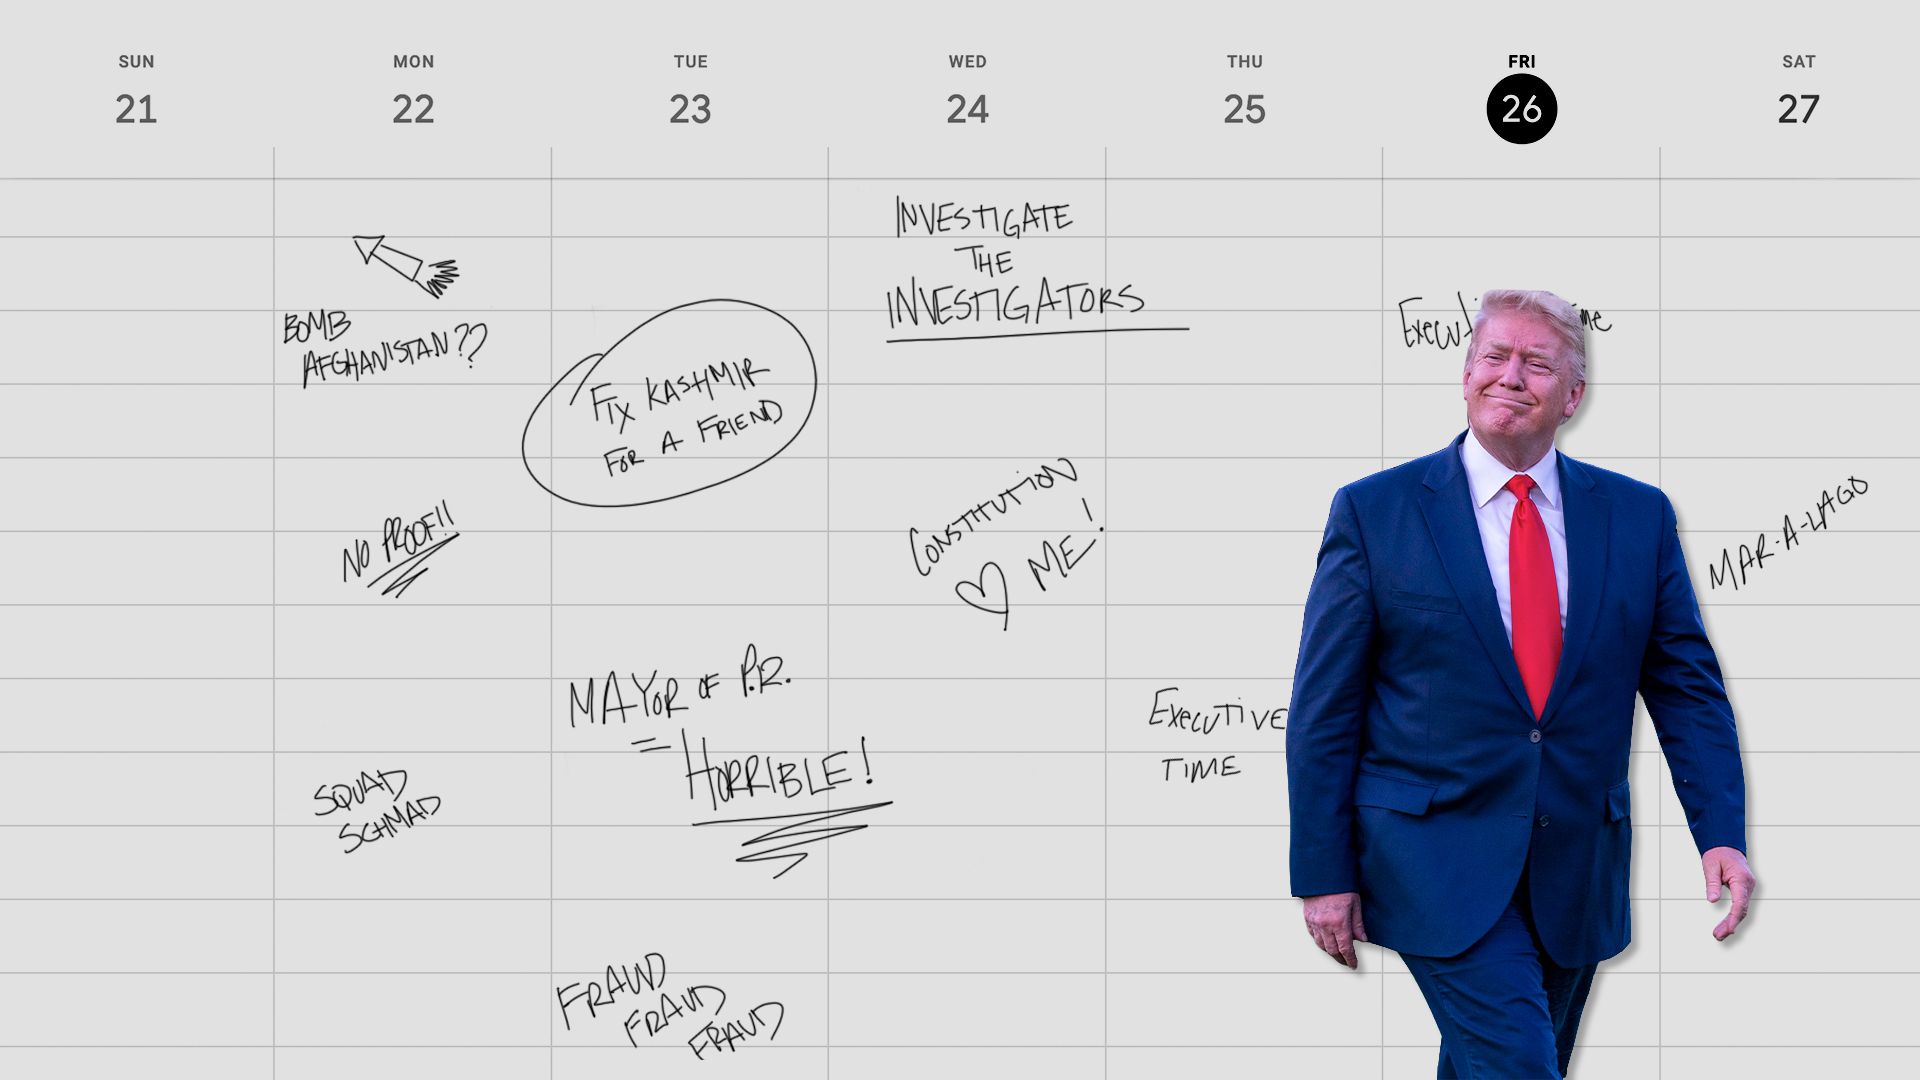 Illustration of President Trump in front of a weekly calendar showing various to-dos like "Fix Kashmir for a friend" and "Squad Schmad"